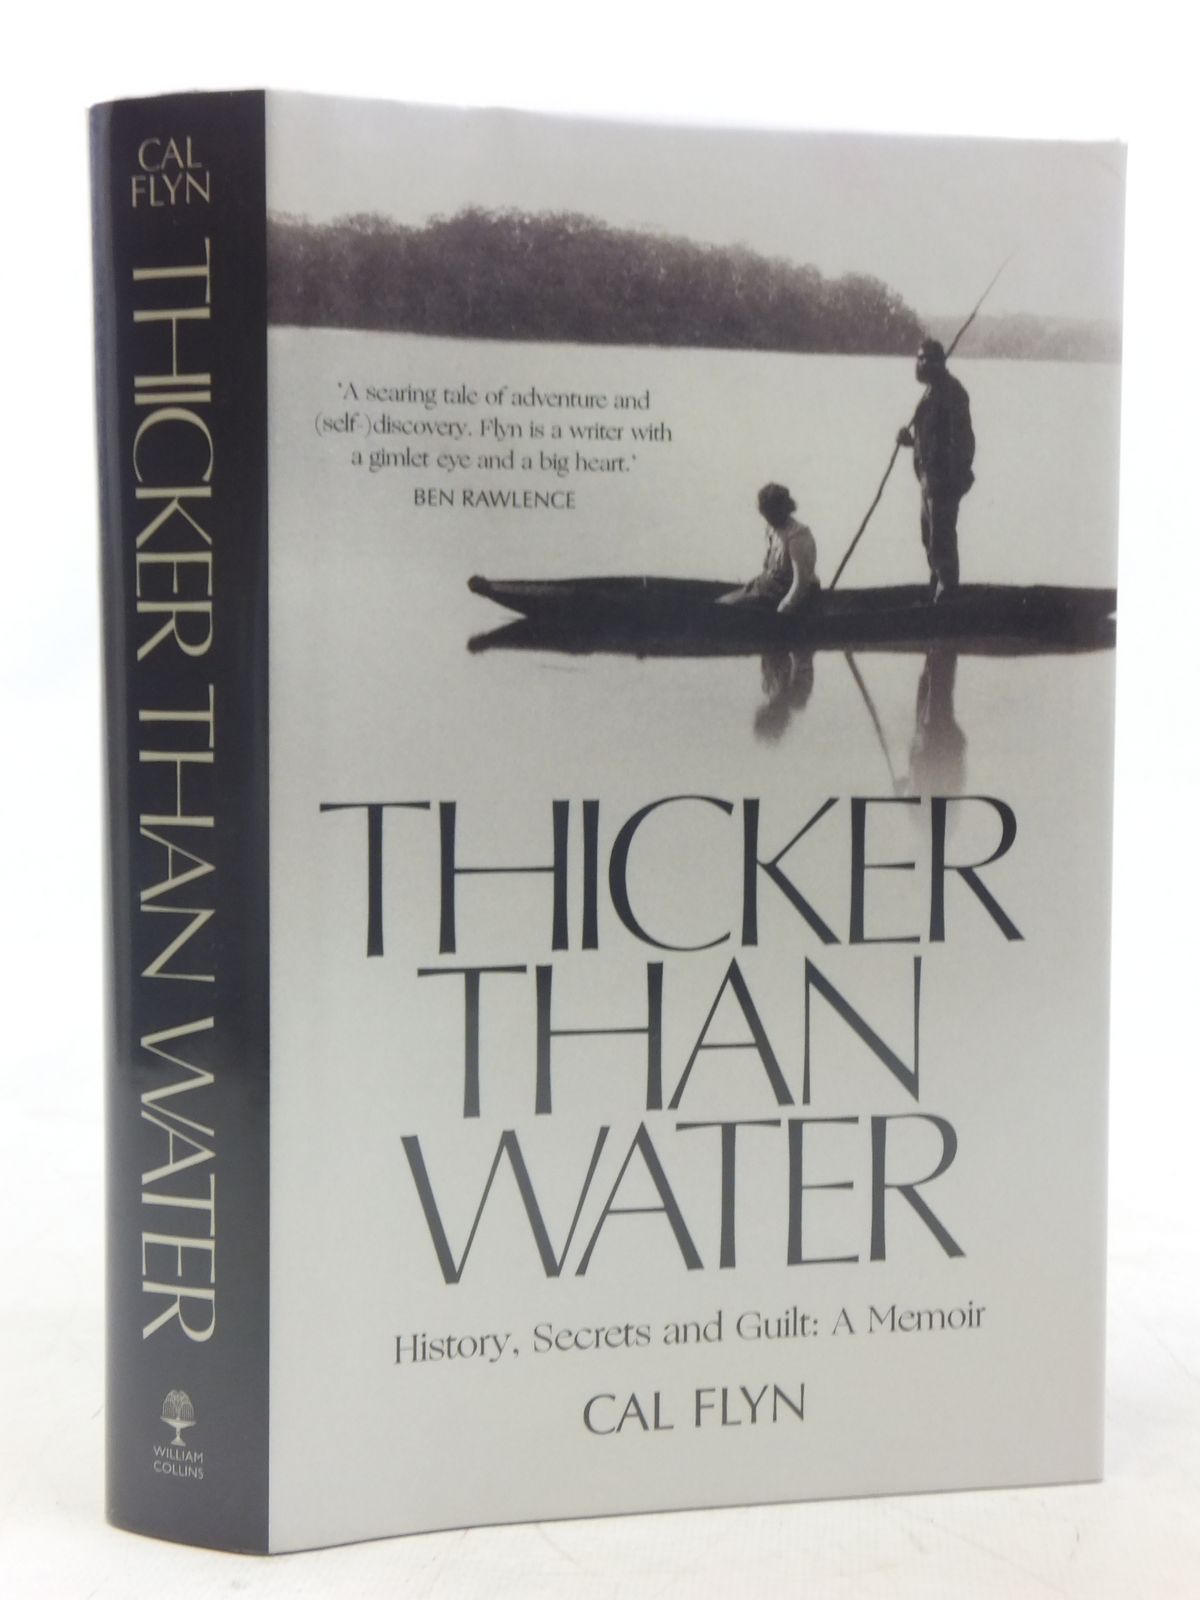 Stella & Rose's Books : THICKER THAN WATER HISTORY ...